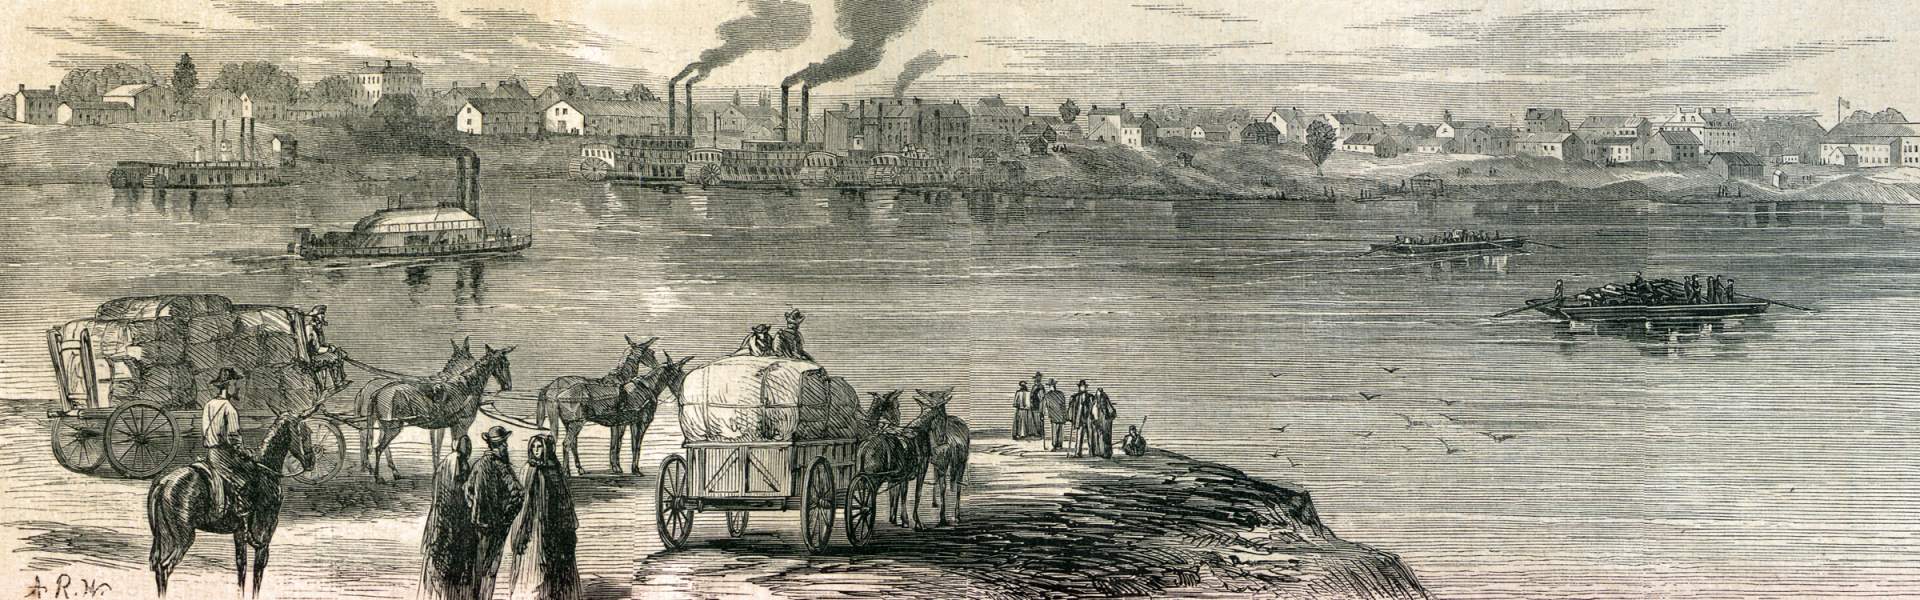 Little Rock, Arkansas, May 1866, artist's impression, zoomable image